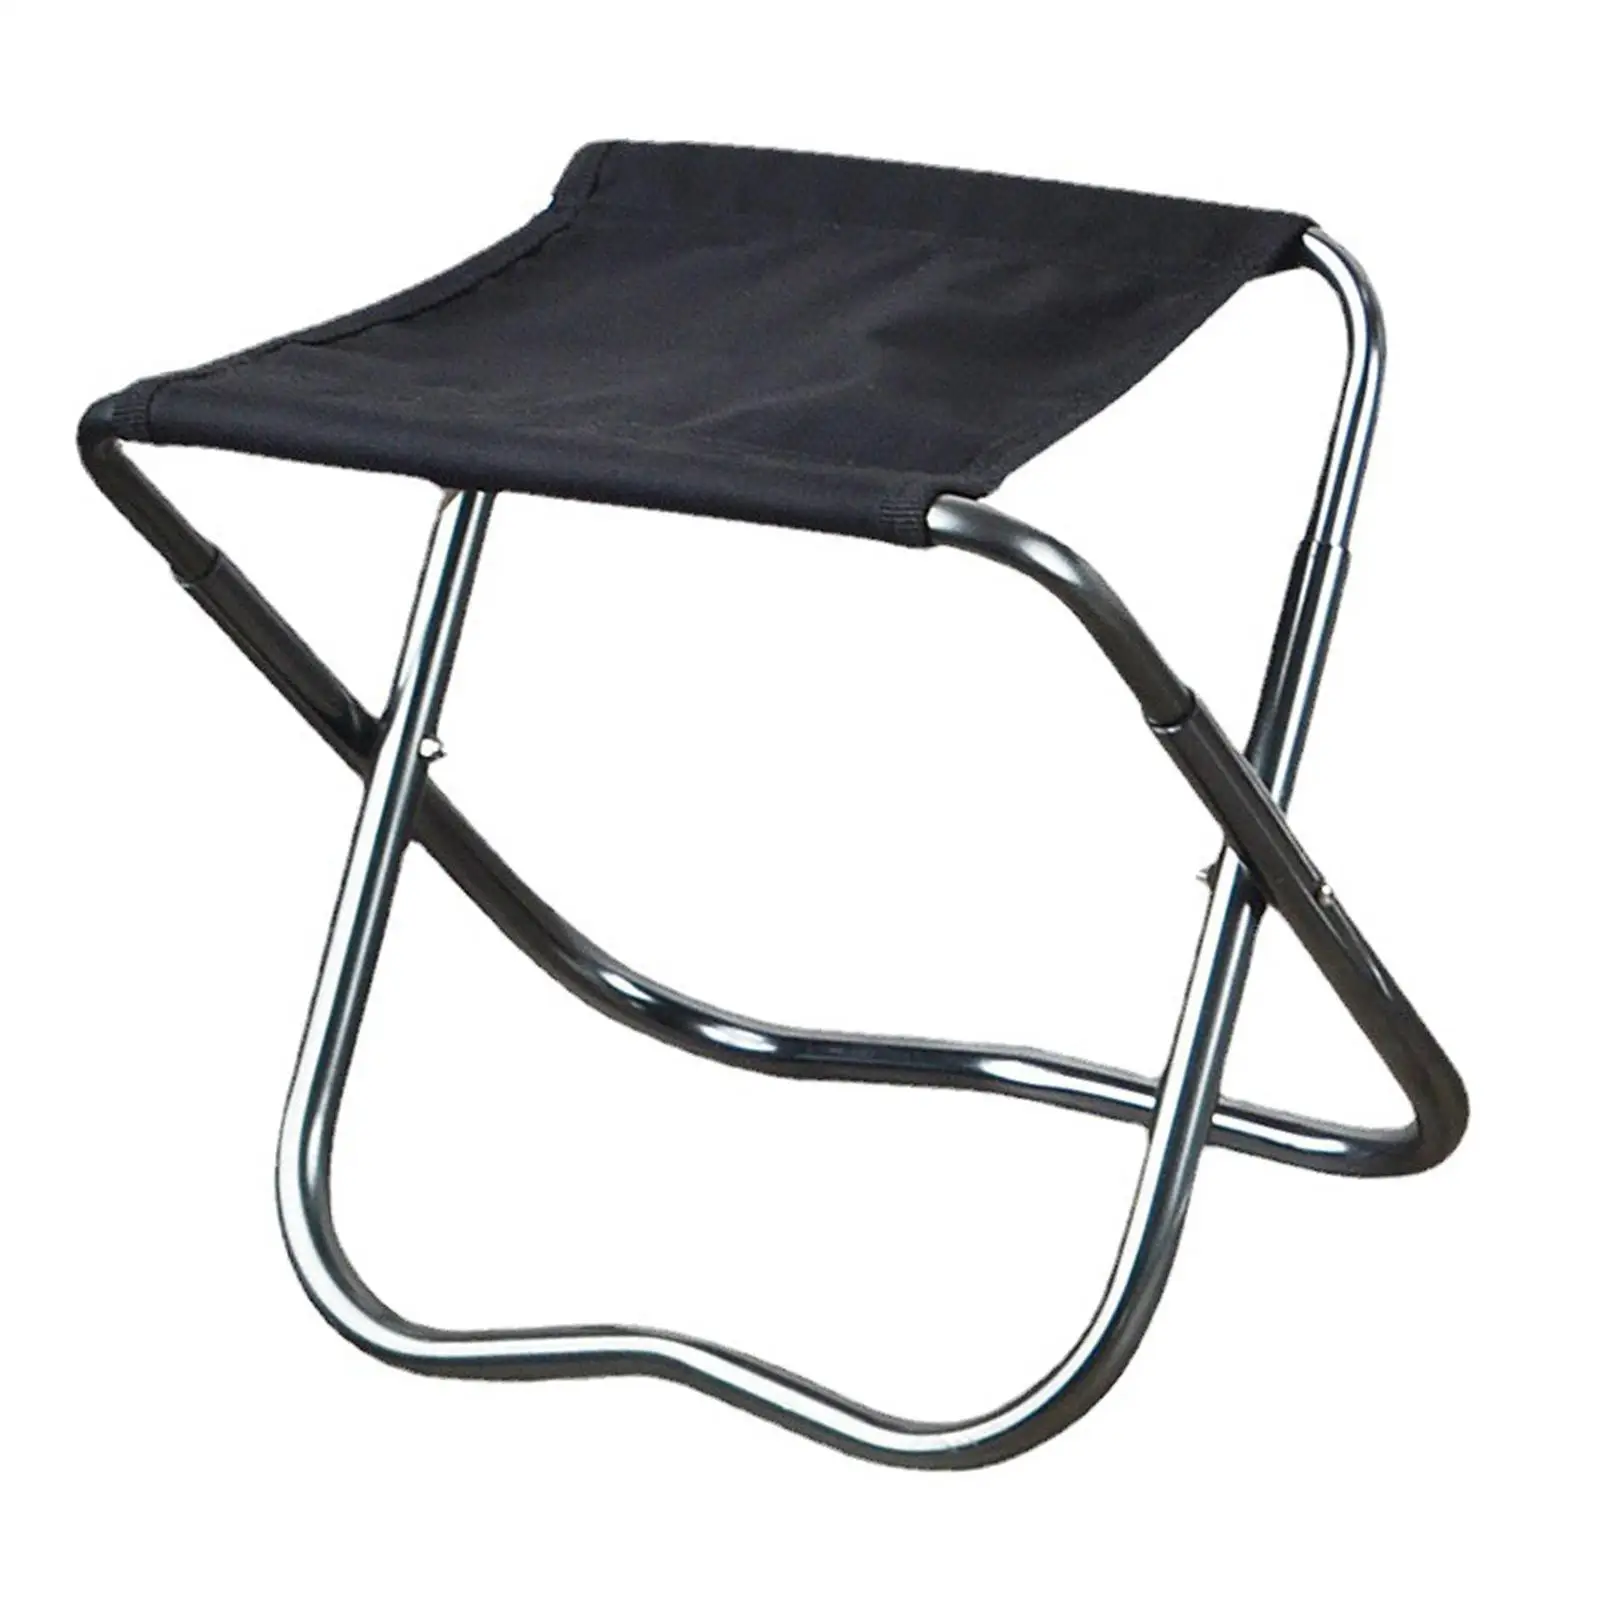 Camping Chair Outdoor Foldable Durable Easy to Carry Portable Folding Stool Fishing Seat for BBQ Barbecue Picnic Lawn Fishing